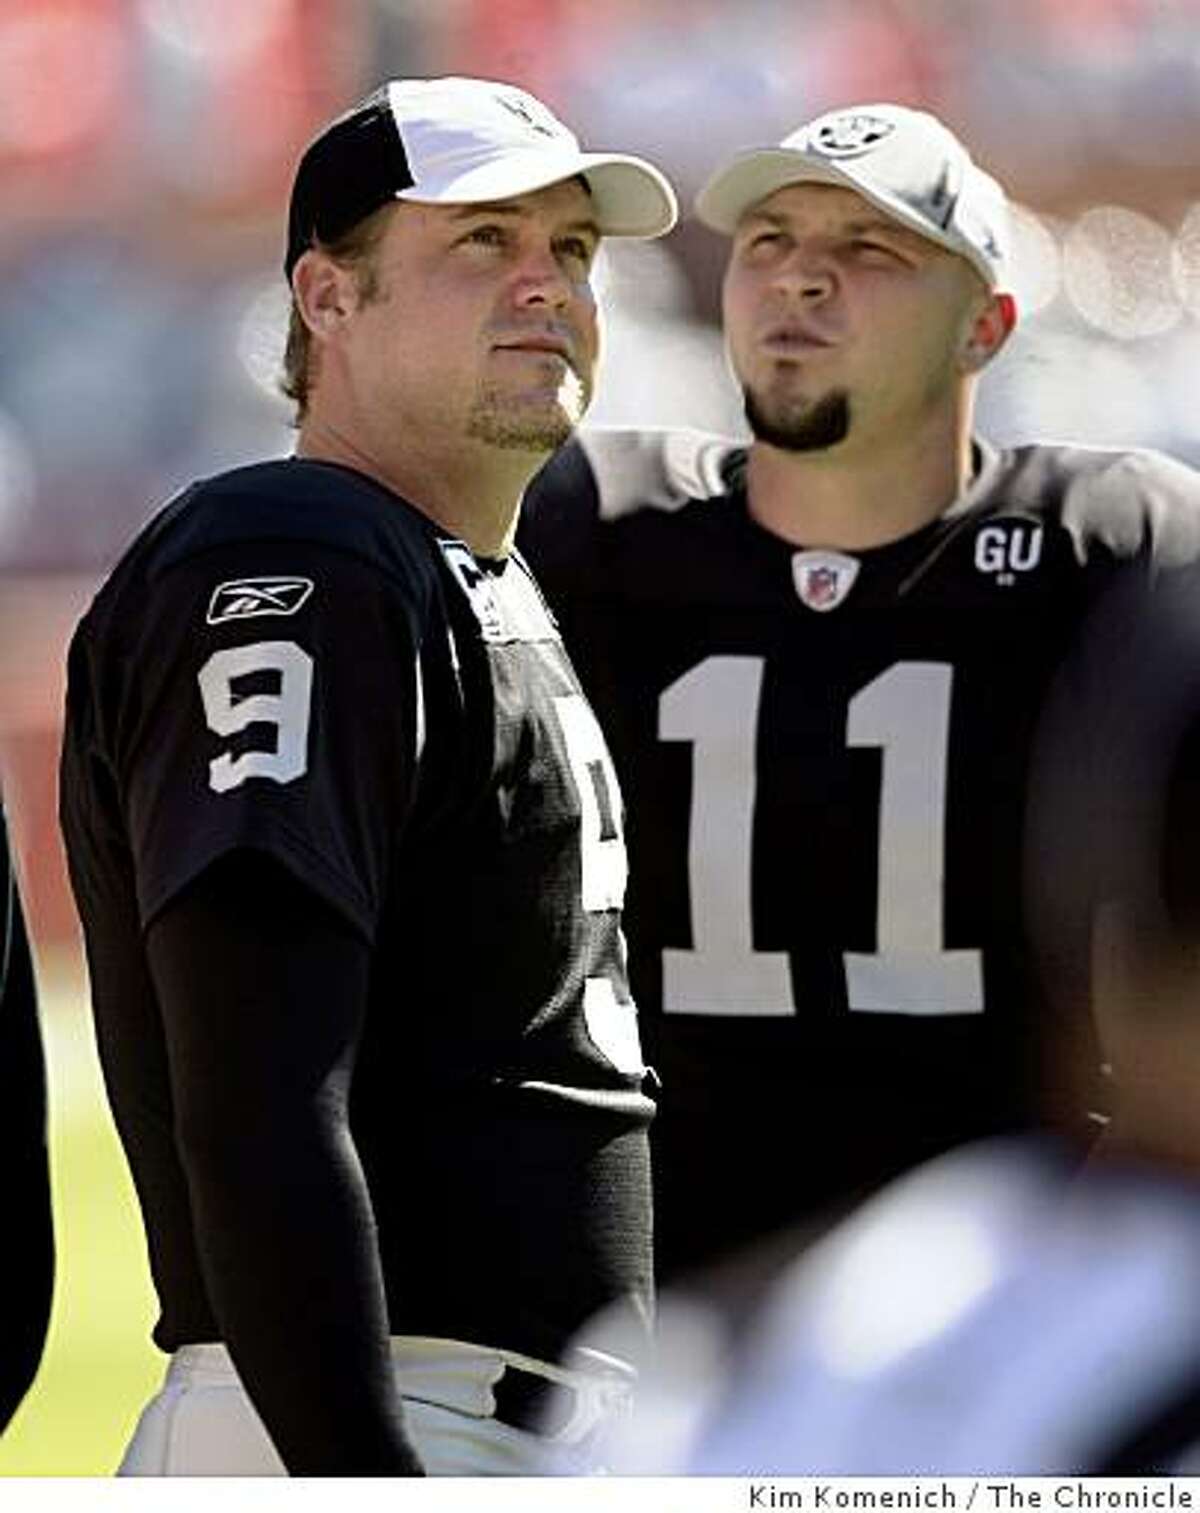 The jersies of Oakland Raiders punter Shane Lechler, left, and kicker Sebastian Janikowski come together to form "911" as the teacm warms up before the Raiders play the Miami Dolphins at Dolphins Stadium in Miami, Fla., on Sunday, Nov. 16, 2008